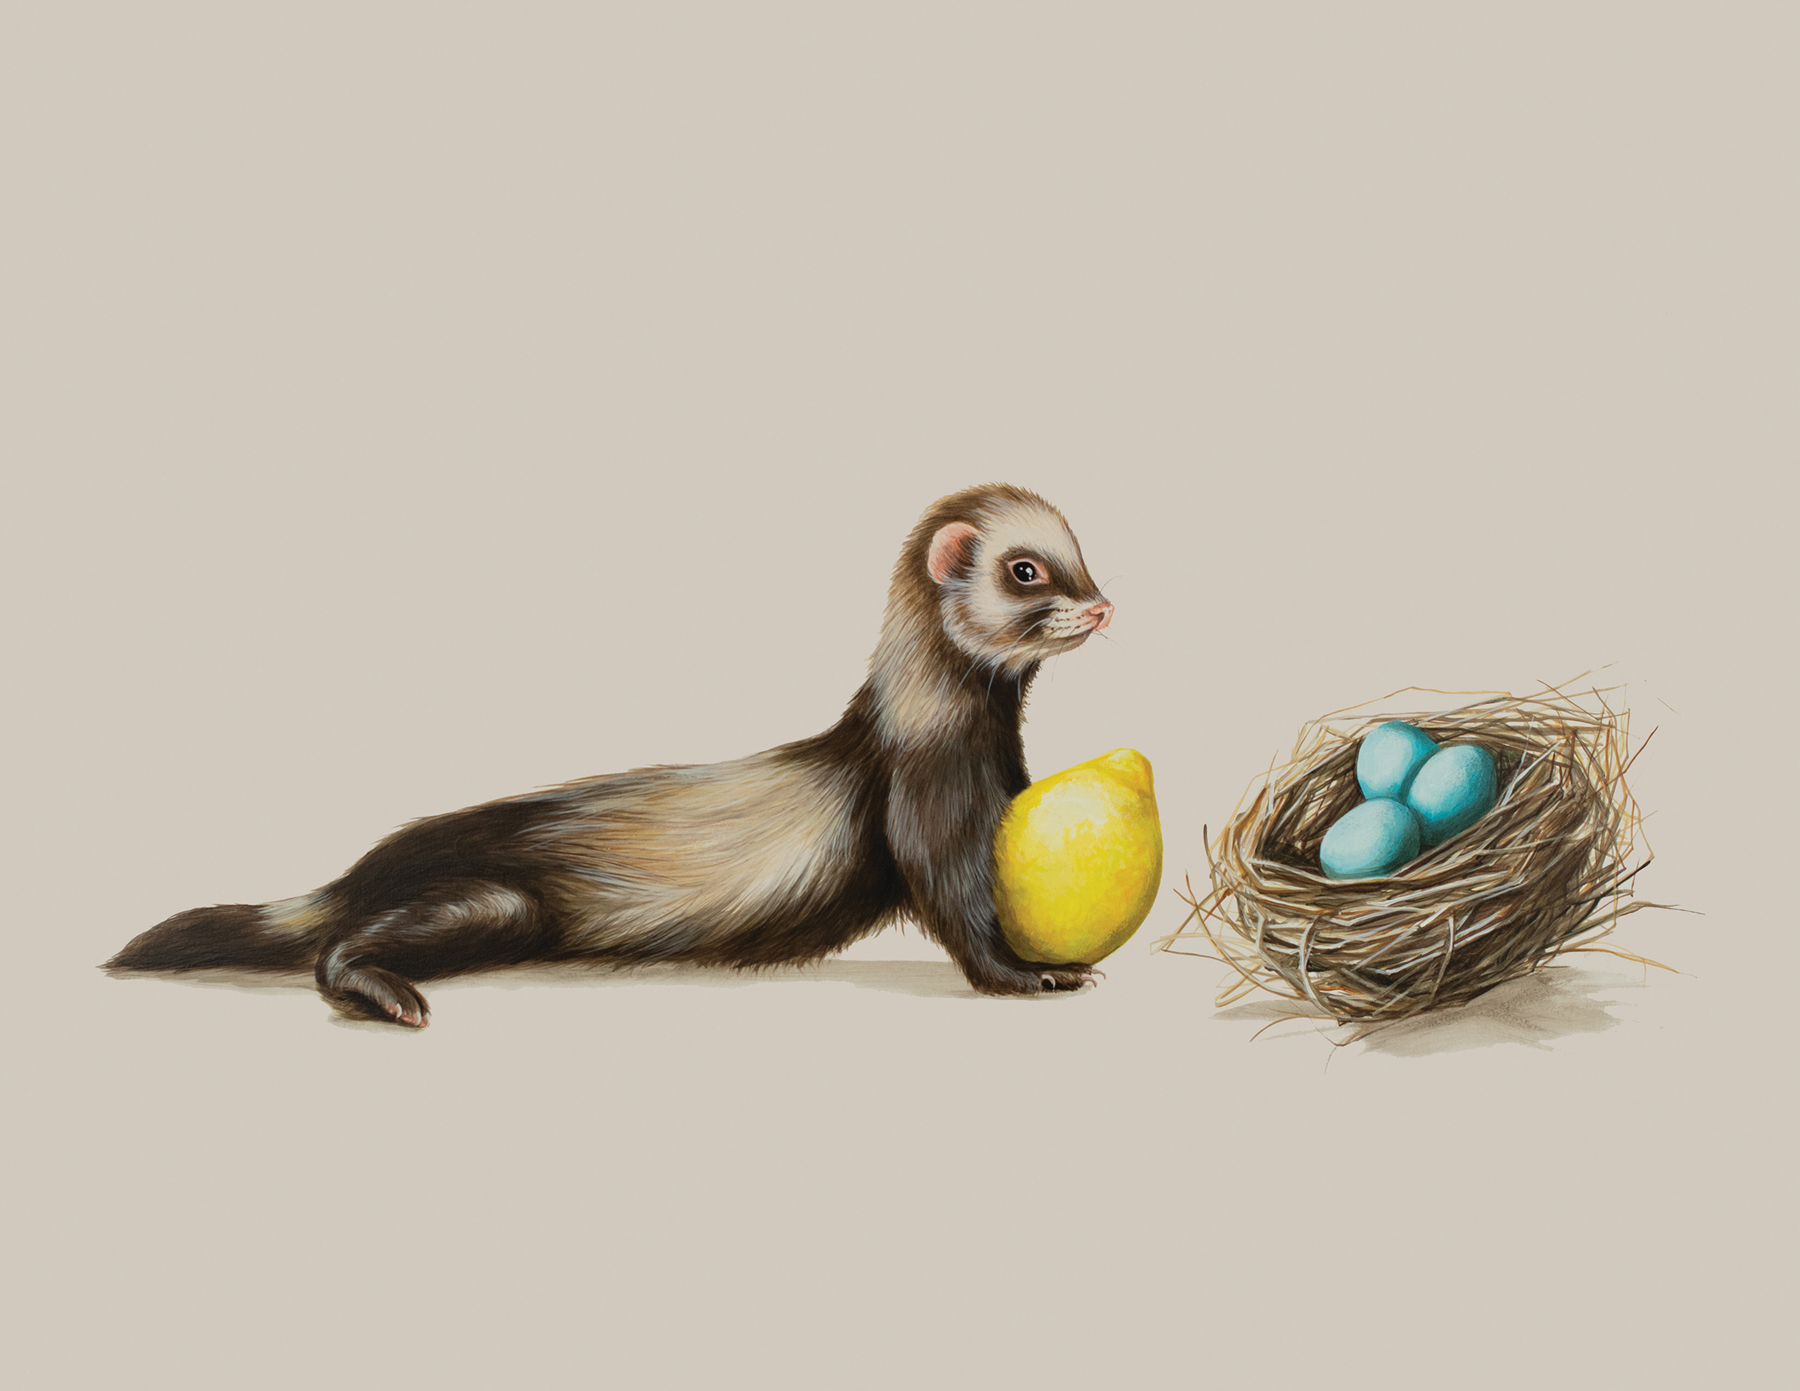 Tricia George: The Ferret and The Three Blue Eggs